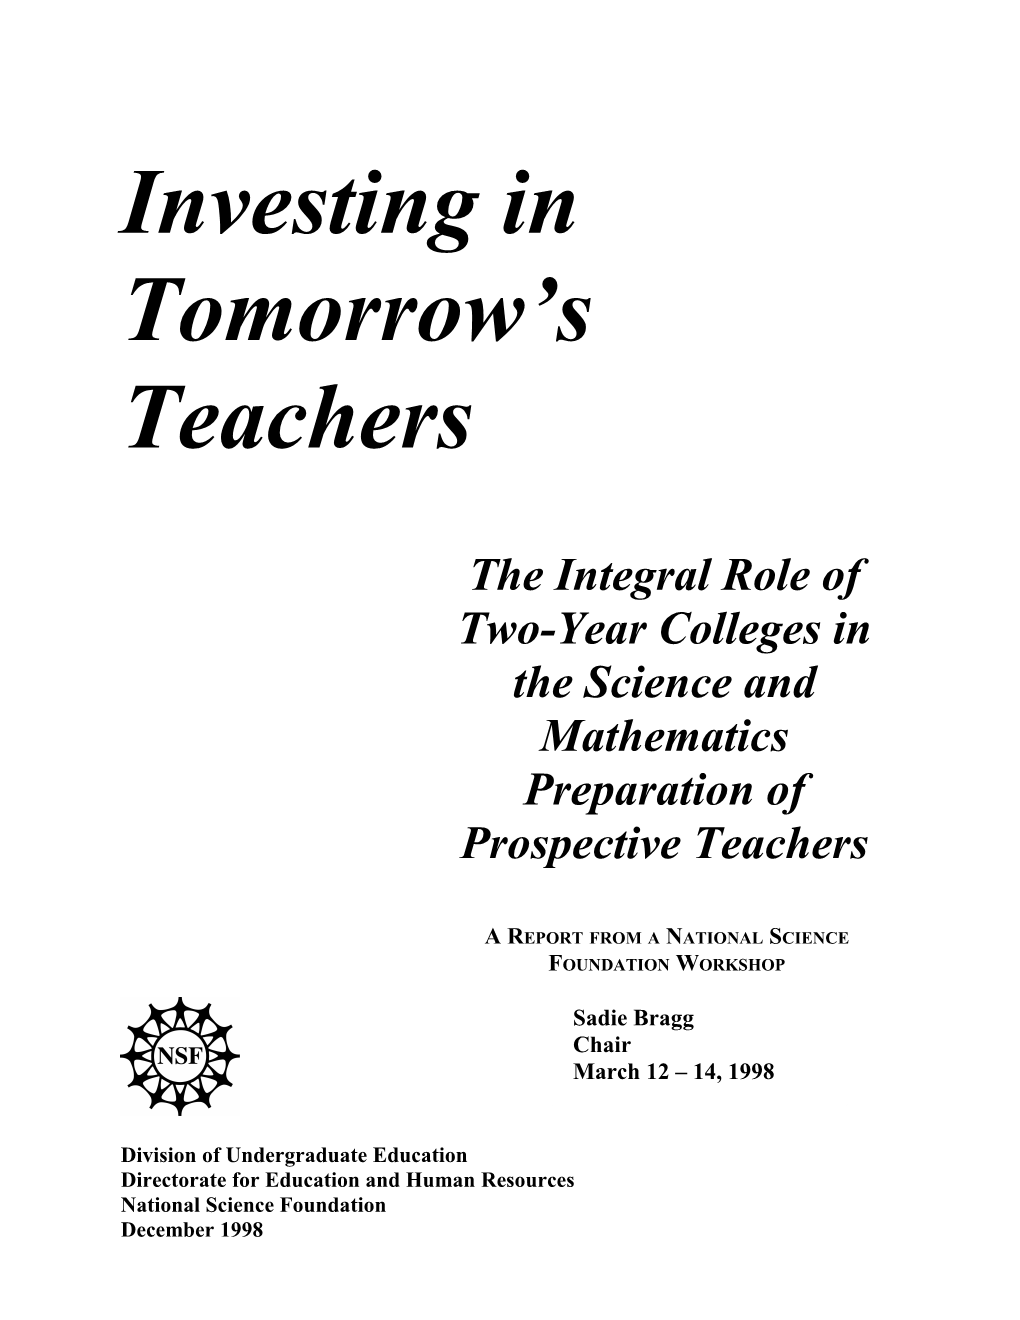 A Large Percentage of Prospective Teachers Begin Their Education in Two-Year Colleges